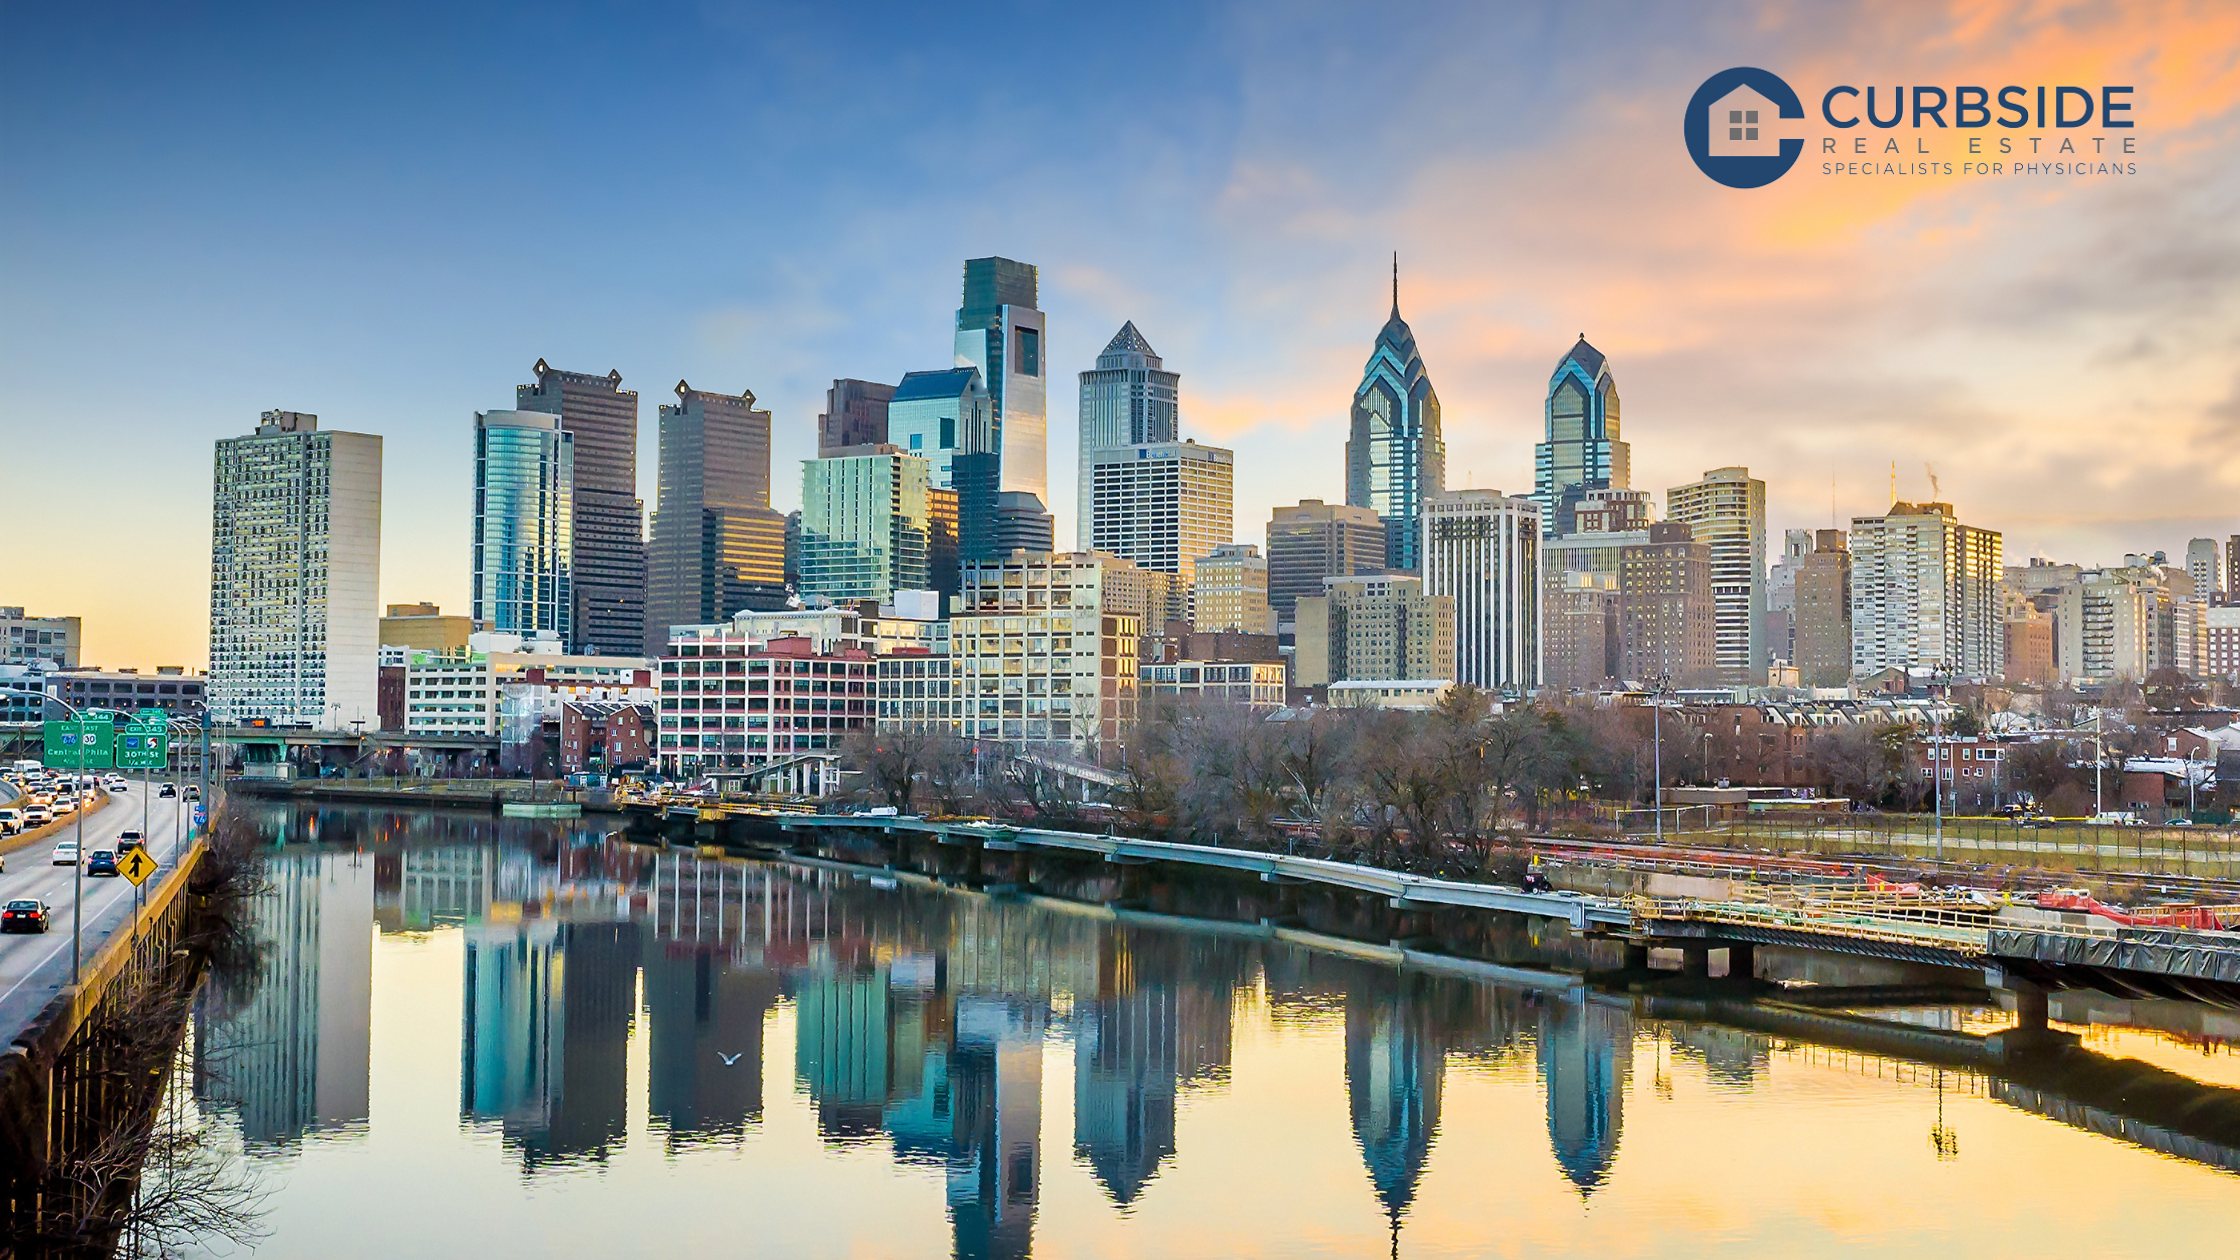 Philadelphia: A Promising Home for Physicians